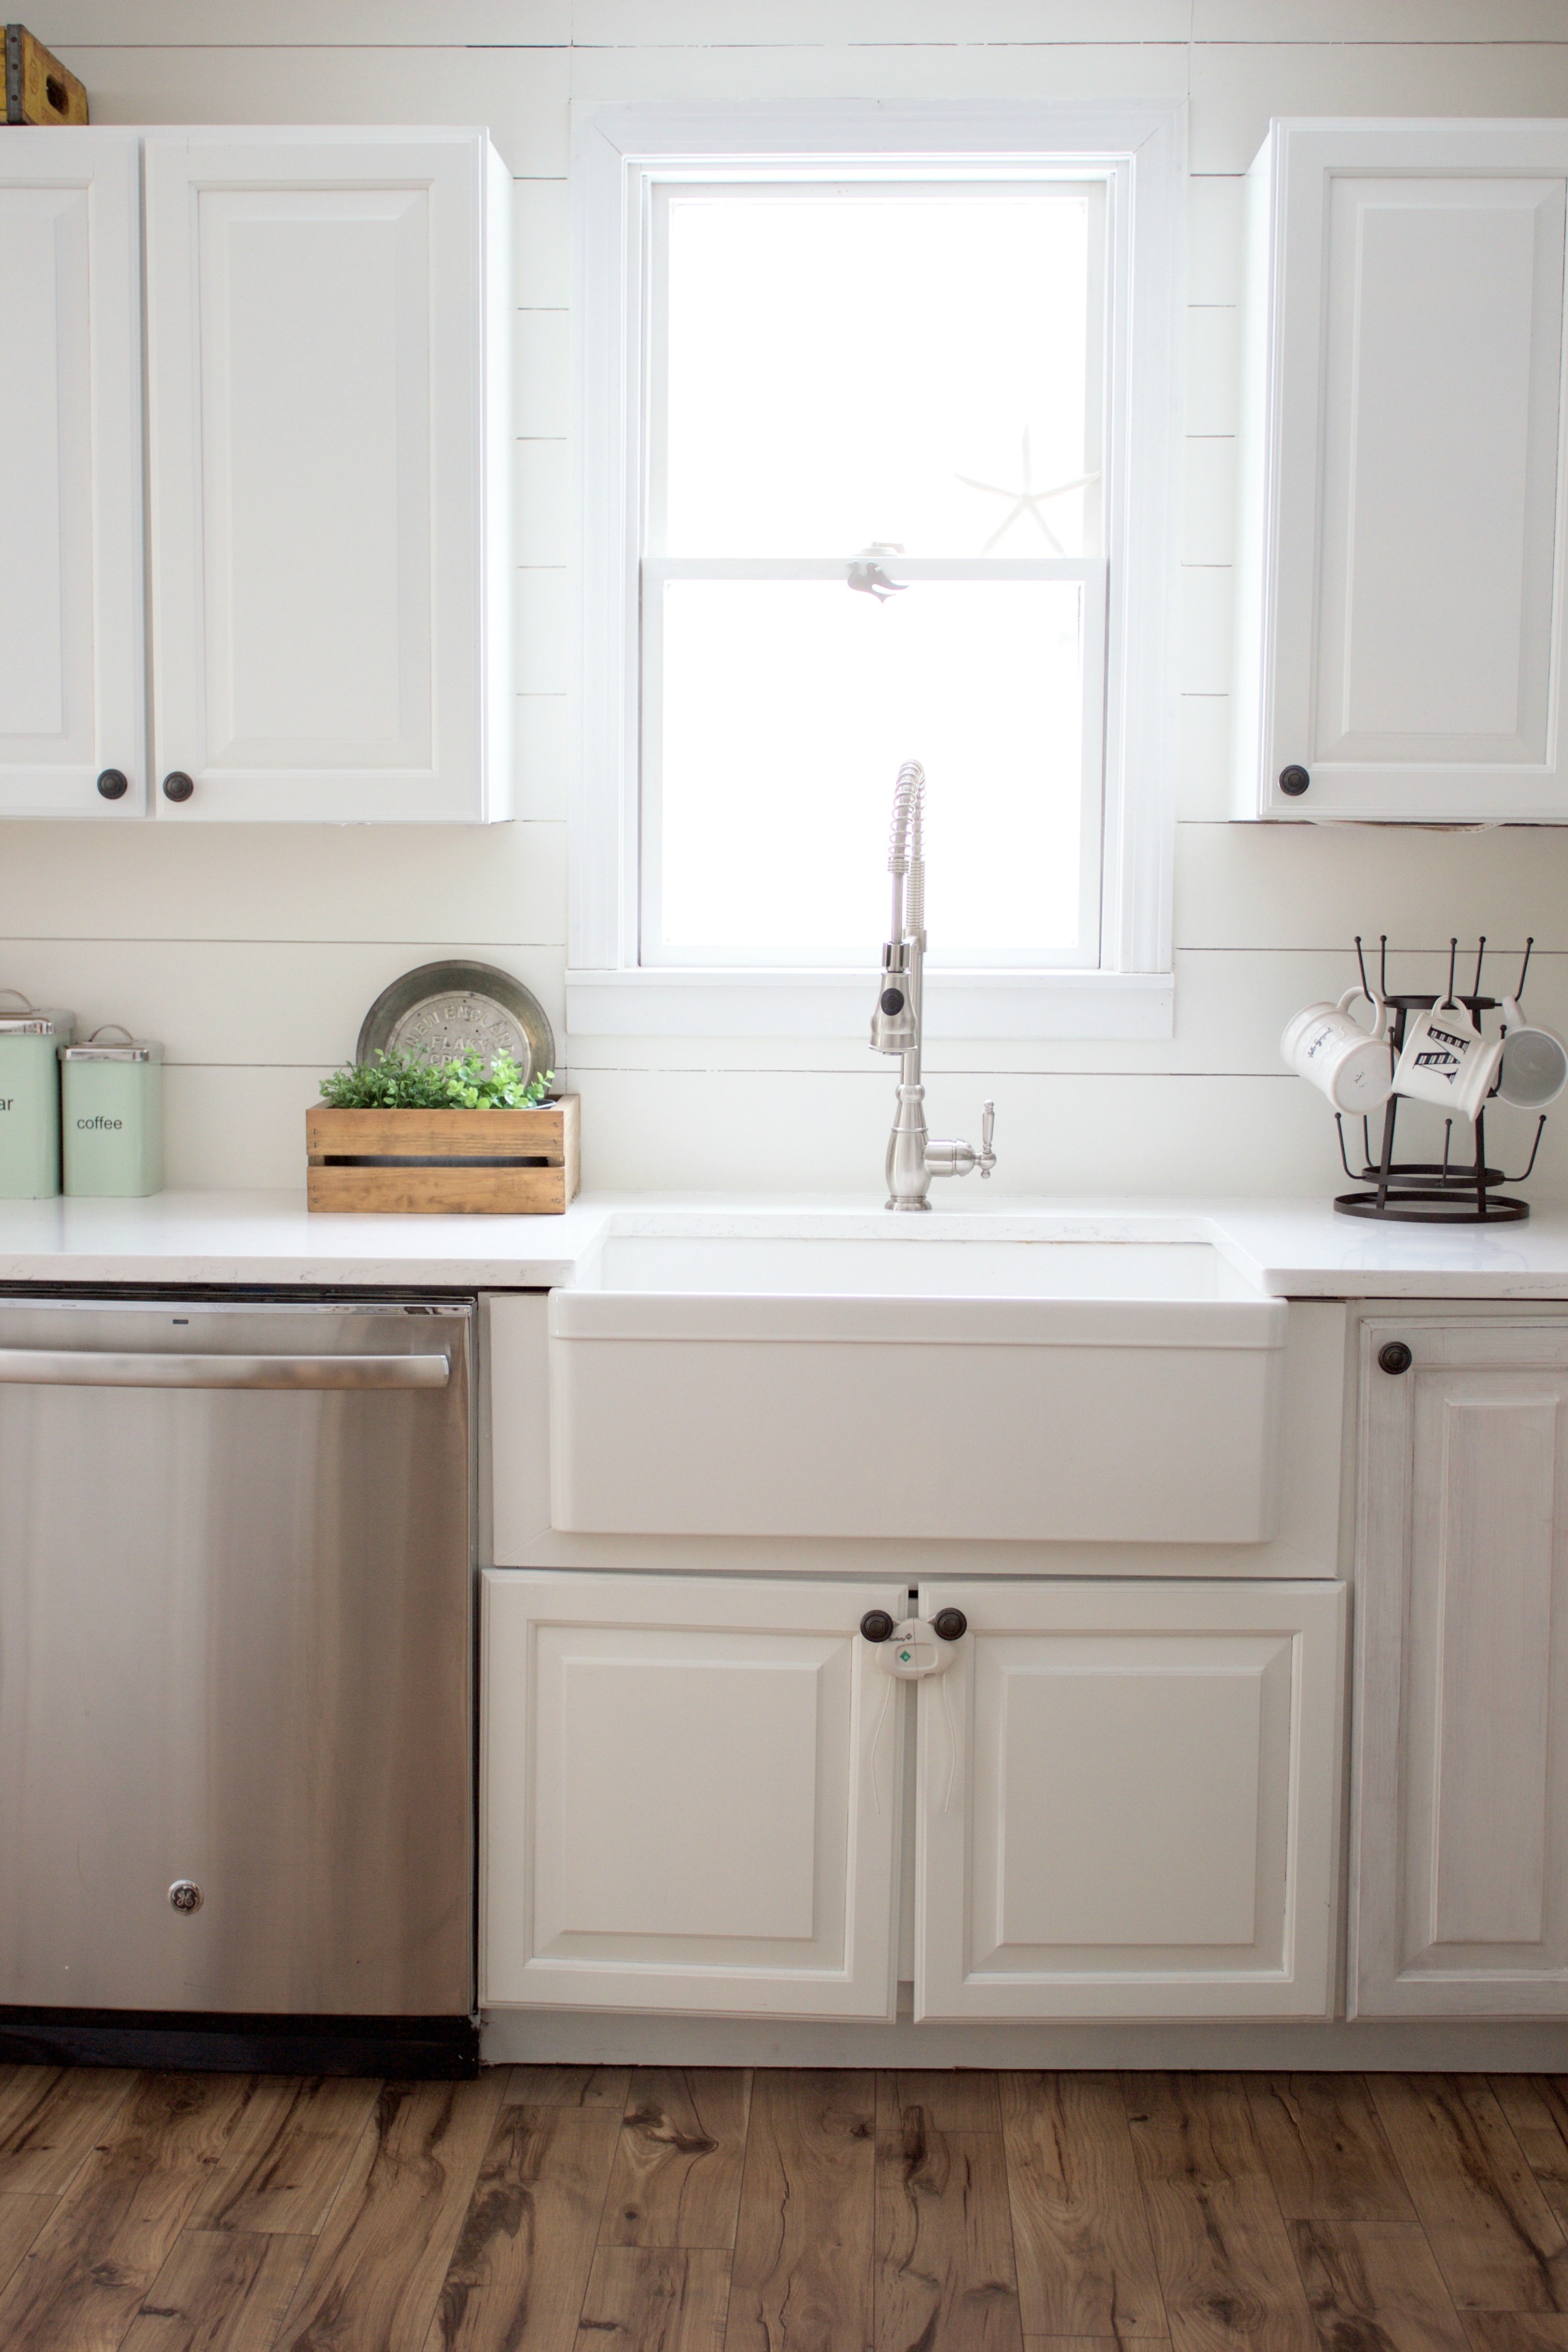 A quartz countertop review and why choose quartz over other materials for countertops